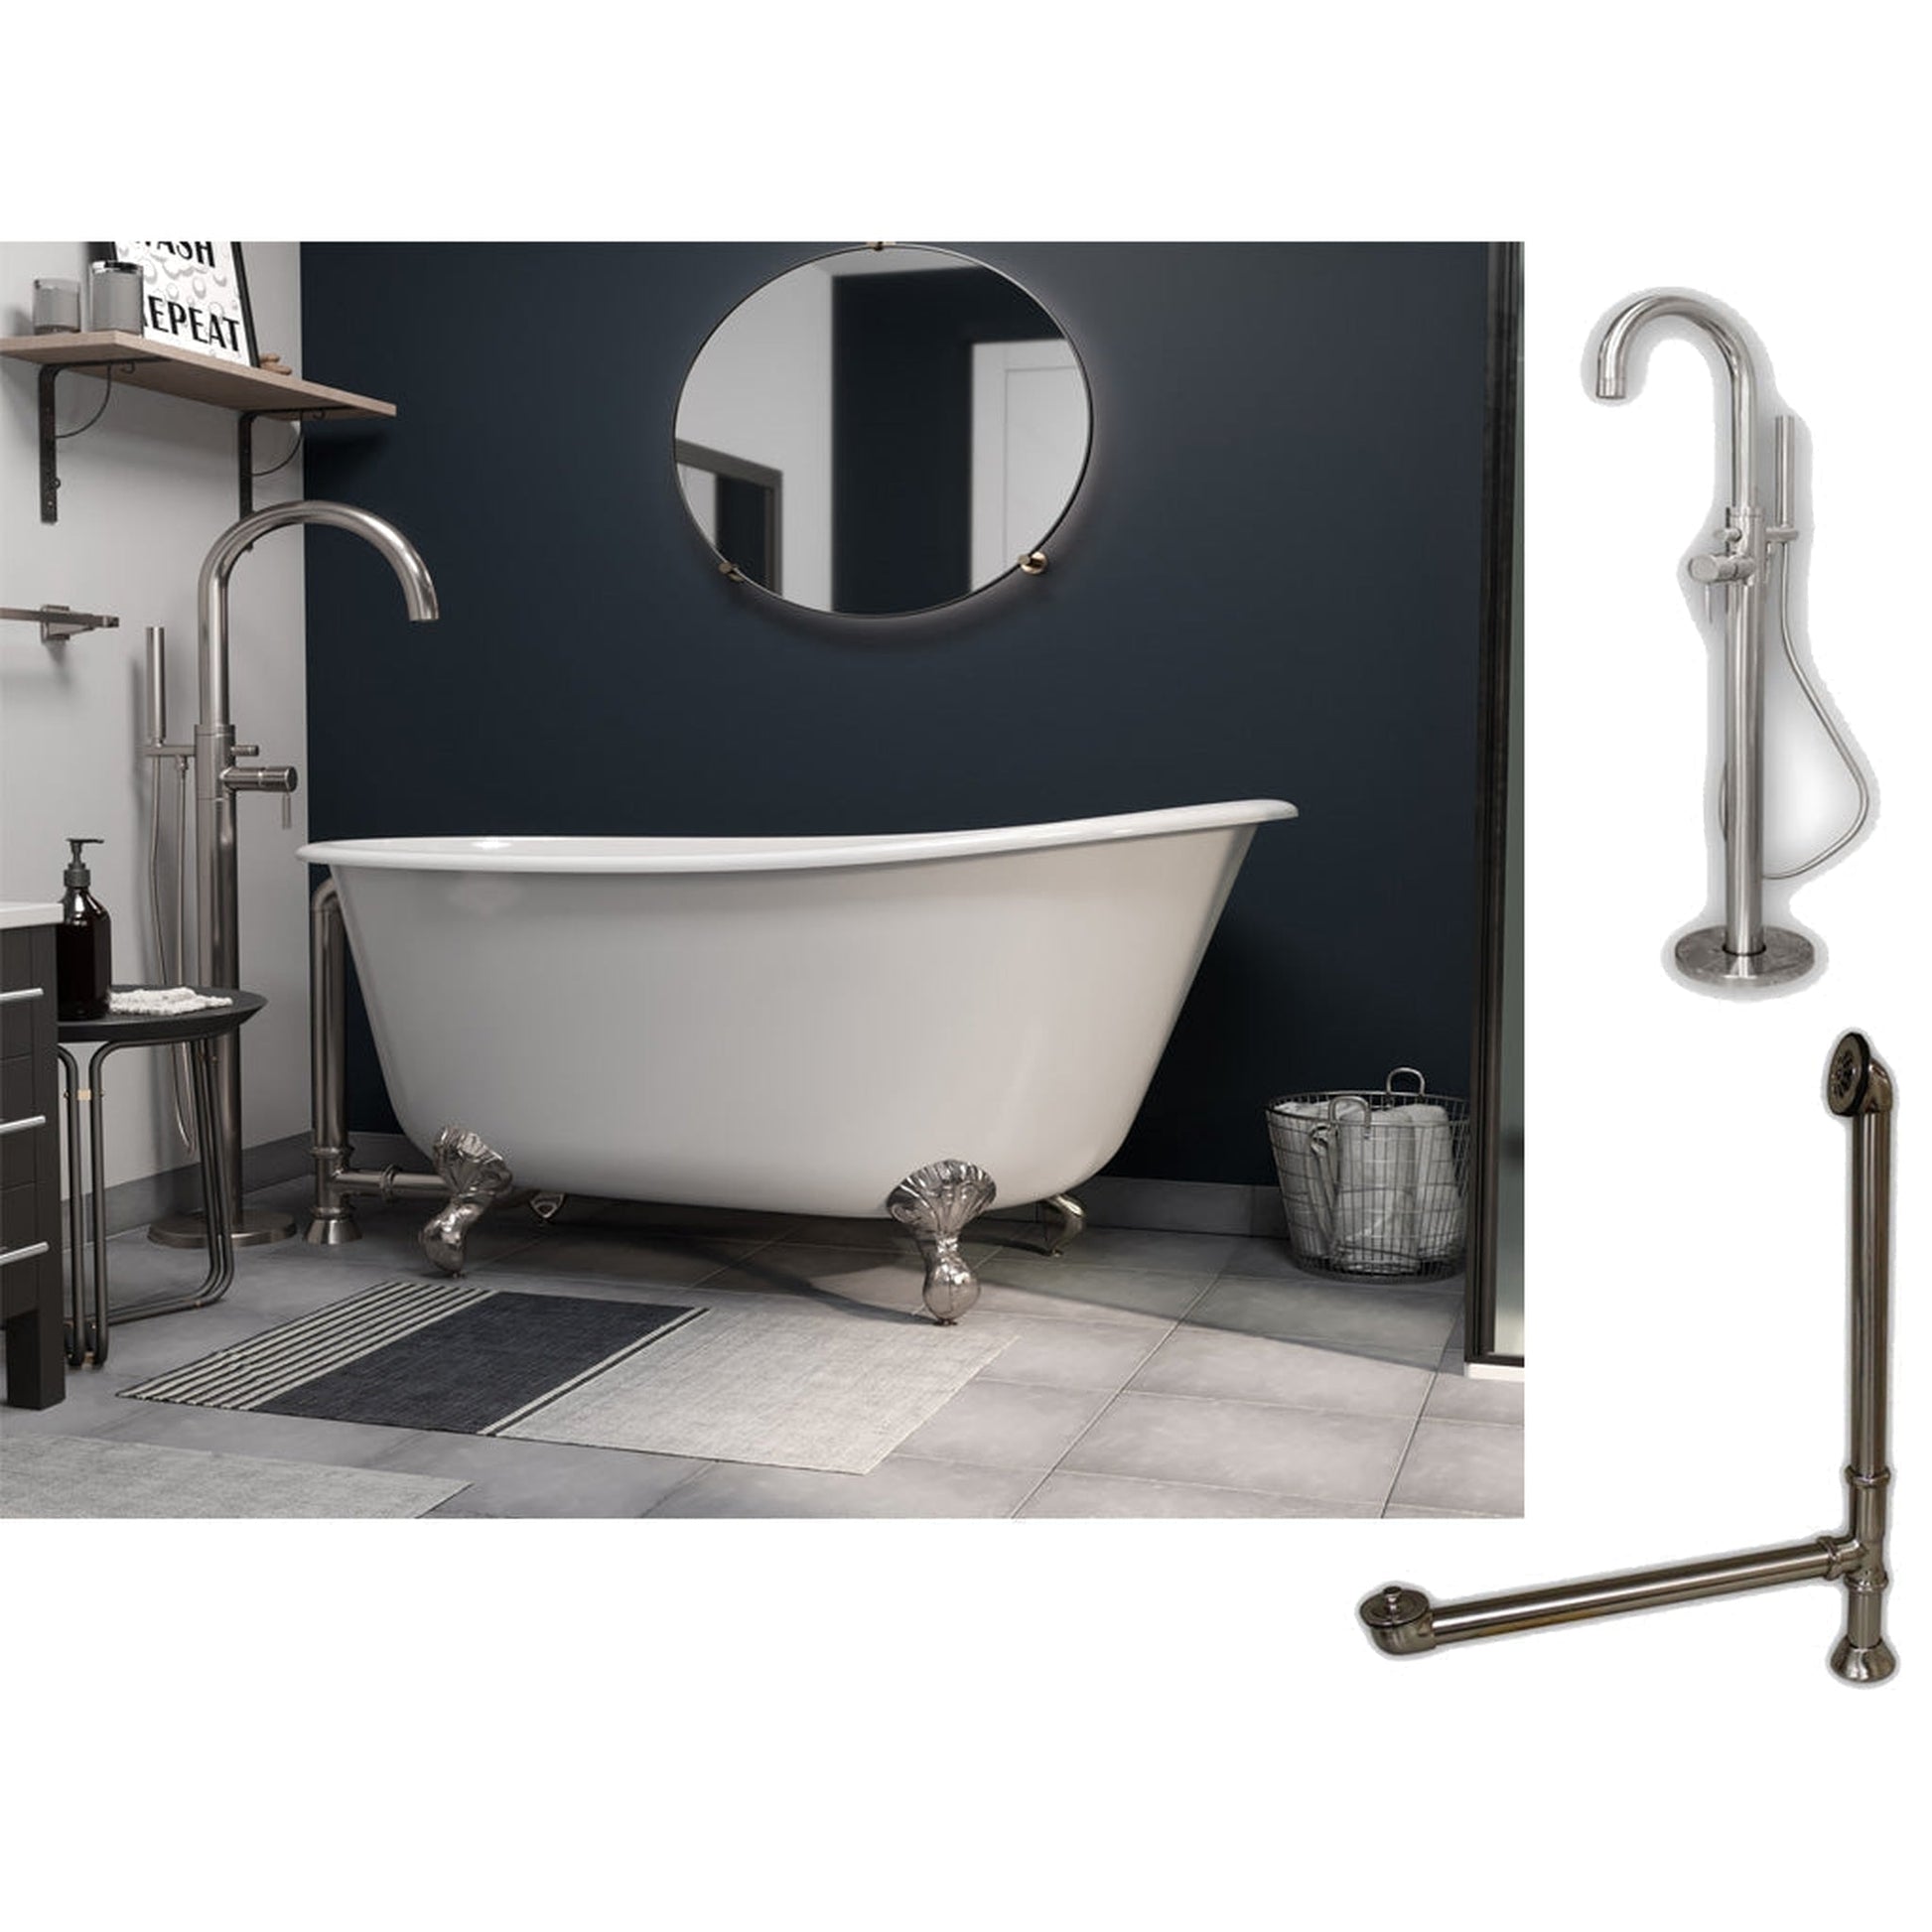 Cambridge Plumbing 58" White Cast Iron Swedish Single Slipper Clawfoot Bathtub With No Deck Holes And Complete Plumbing Package Including Modern Floor Mounted Faucet, Drain And Overflow Assembly In Brushed Nickel